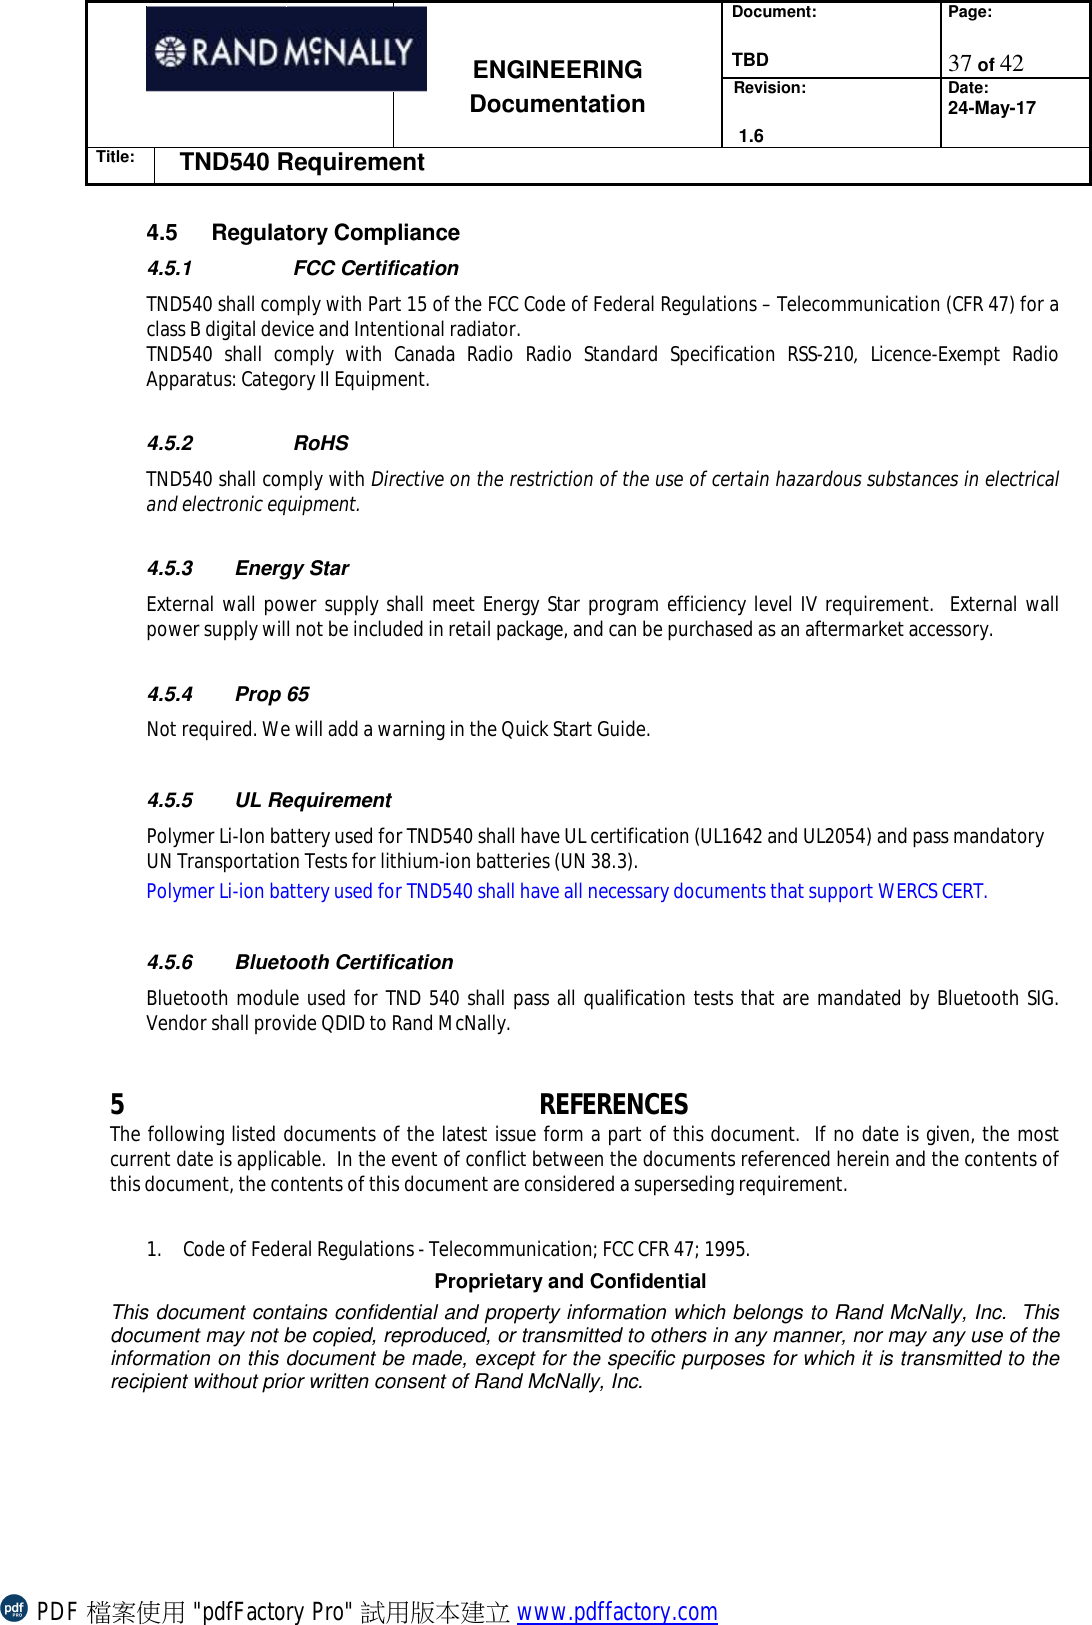 Document:  TBD Page:  37 of 42   ENGINEERING Documentation Revision:   1.6 Date: 24-May-17 Title: TND540 Requirement  Proprietary and Confidential This document contains confidential and property information which belongs to Rand McNally, Inc.  This document may not be copied, reproduced, or transmitted to others in any manner, nor may any use of the information on this document be made, except for the specific purposes for which it is transmitted to the recipient without prior written consent of Rand McNally, Inc.   4.5  Regulatory Compliance   4.5.1   FCC Certification   TND540 shall comply with Part 15 of the FCC Code of Federal Regulations – Telecommunication (CFR 47) for a class B digital device and Intentional radiator.   TND540 shall comply with Canada Radio Radio Standard Specification RSS-210,  Licence-Exempt Radio Apparatus: Category II Equipment.  4.5.2   RoHS  TND540 shall comply with Directive on the restriction of the use of certain hazardous substances in electrical and electronic equipment.  4.5.3 Energy Star External wall power supply shall meet Energy Star program efficiency level IV requirement.  External wall power supply will not be included in retail package, and can be purchased as an aftermarket accessory.  4.5.4 Prop 65 Not required. We will add a warning in the Quick Start Guide.  4.5.5 UL Requirement Polymer Li-Ion battery used for TND540 shall have UL certification (UL1642 and UL2054) and pass mandatory UN Transportation Tests for lithium-ion batteries (UN 38.3). Polymer Li-ion battery used for TND540 shall have all necessary documents that support WERCS CERT.  4.5.6 Bluetooth Certification Bluetooth module used for TND 540 shall pass all qualification tests that are mandated by Bluetooth SIG.  Vendor shall provide QDID to Rand McNally.   5 REFERENCES The following listed documents of the latest issue form a part of this document.  If no date is given, the most current date is applicable.  In the event of conflict between the documents referenced herein and the contents of this document, the contents of this document are considered a superseding requirement.  1. Code of Federal Regulations - Telecommunication; FCC CFR 47; 1995. PDF 檔案使用 &quot;pdfFactory Pro&quot; 試用版本建立 www.pdffactory.com